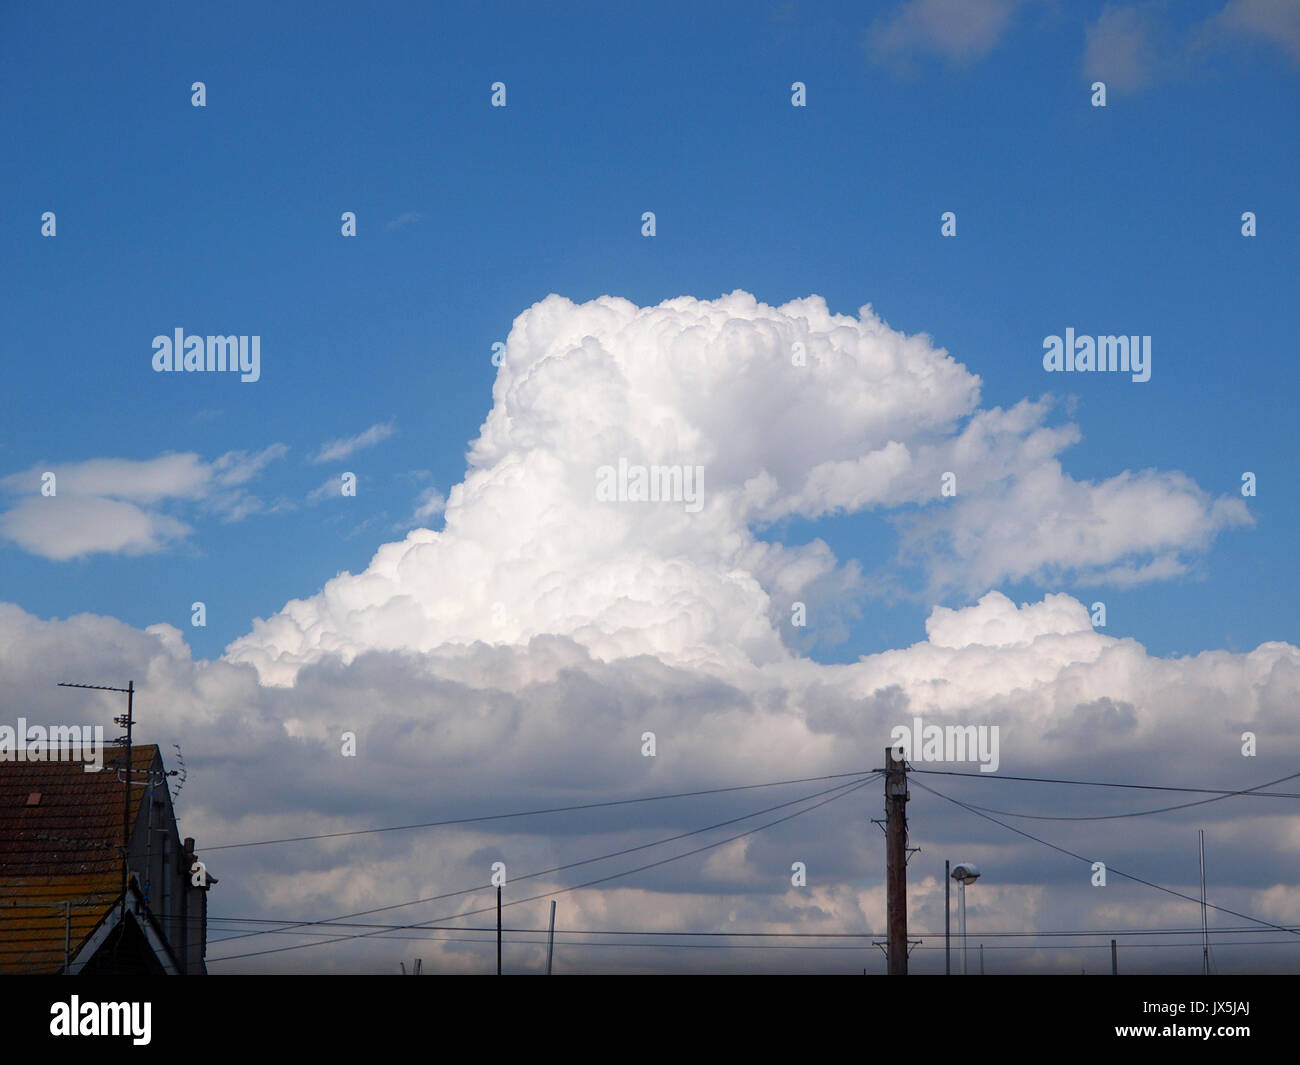 Sheerness, Kent. 15 Aug, 2017. UK Weather: sunny and warm in Sheerness, as large cumulonimbus clouds start to form, the anvil shape indicating a thundercloud. Credit: James Bell/Alamy Live News Stock Photo